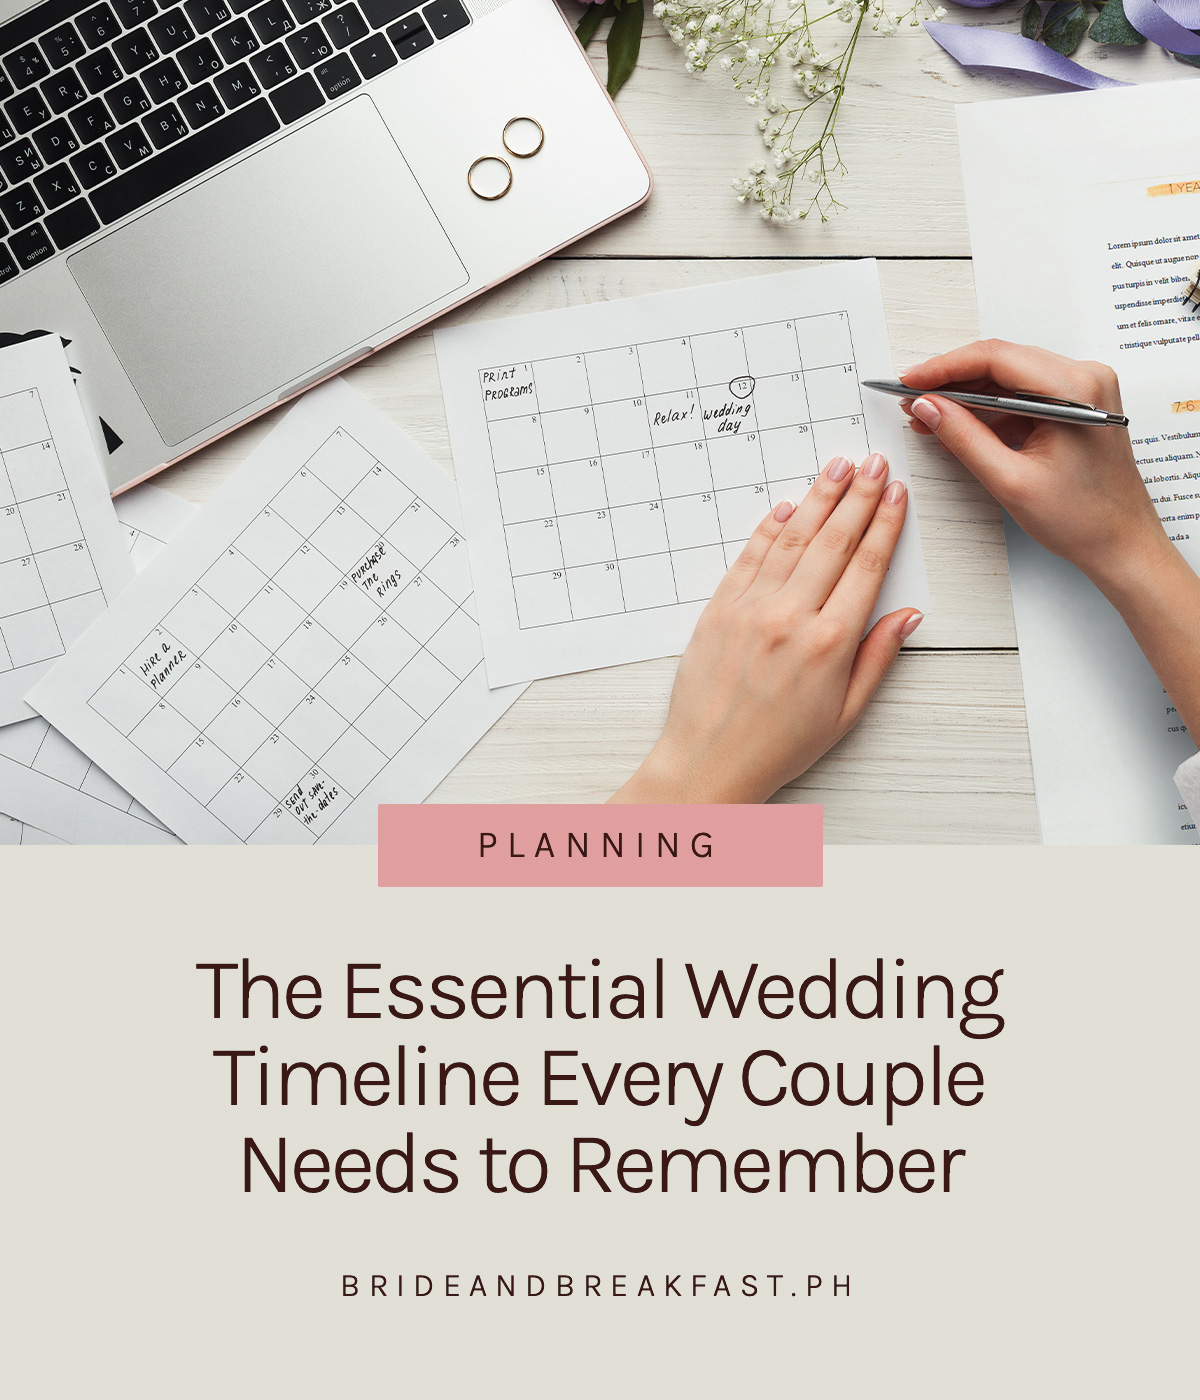 The Essential Wedding Timeline Every Couple Needs to Remember